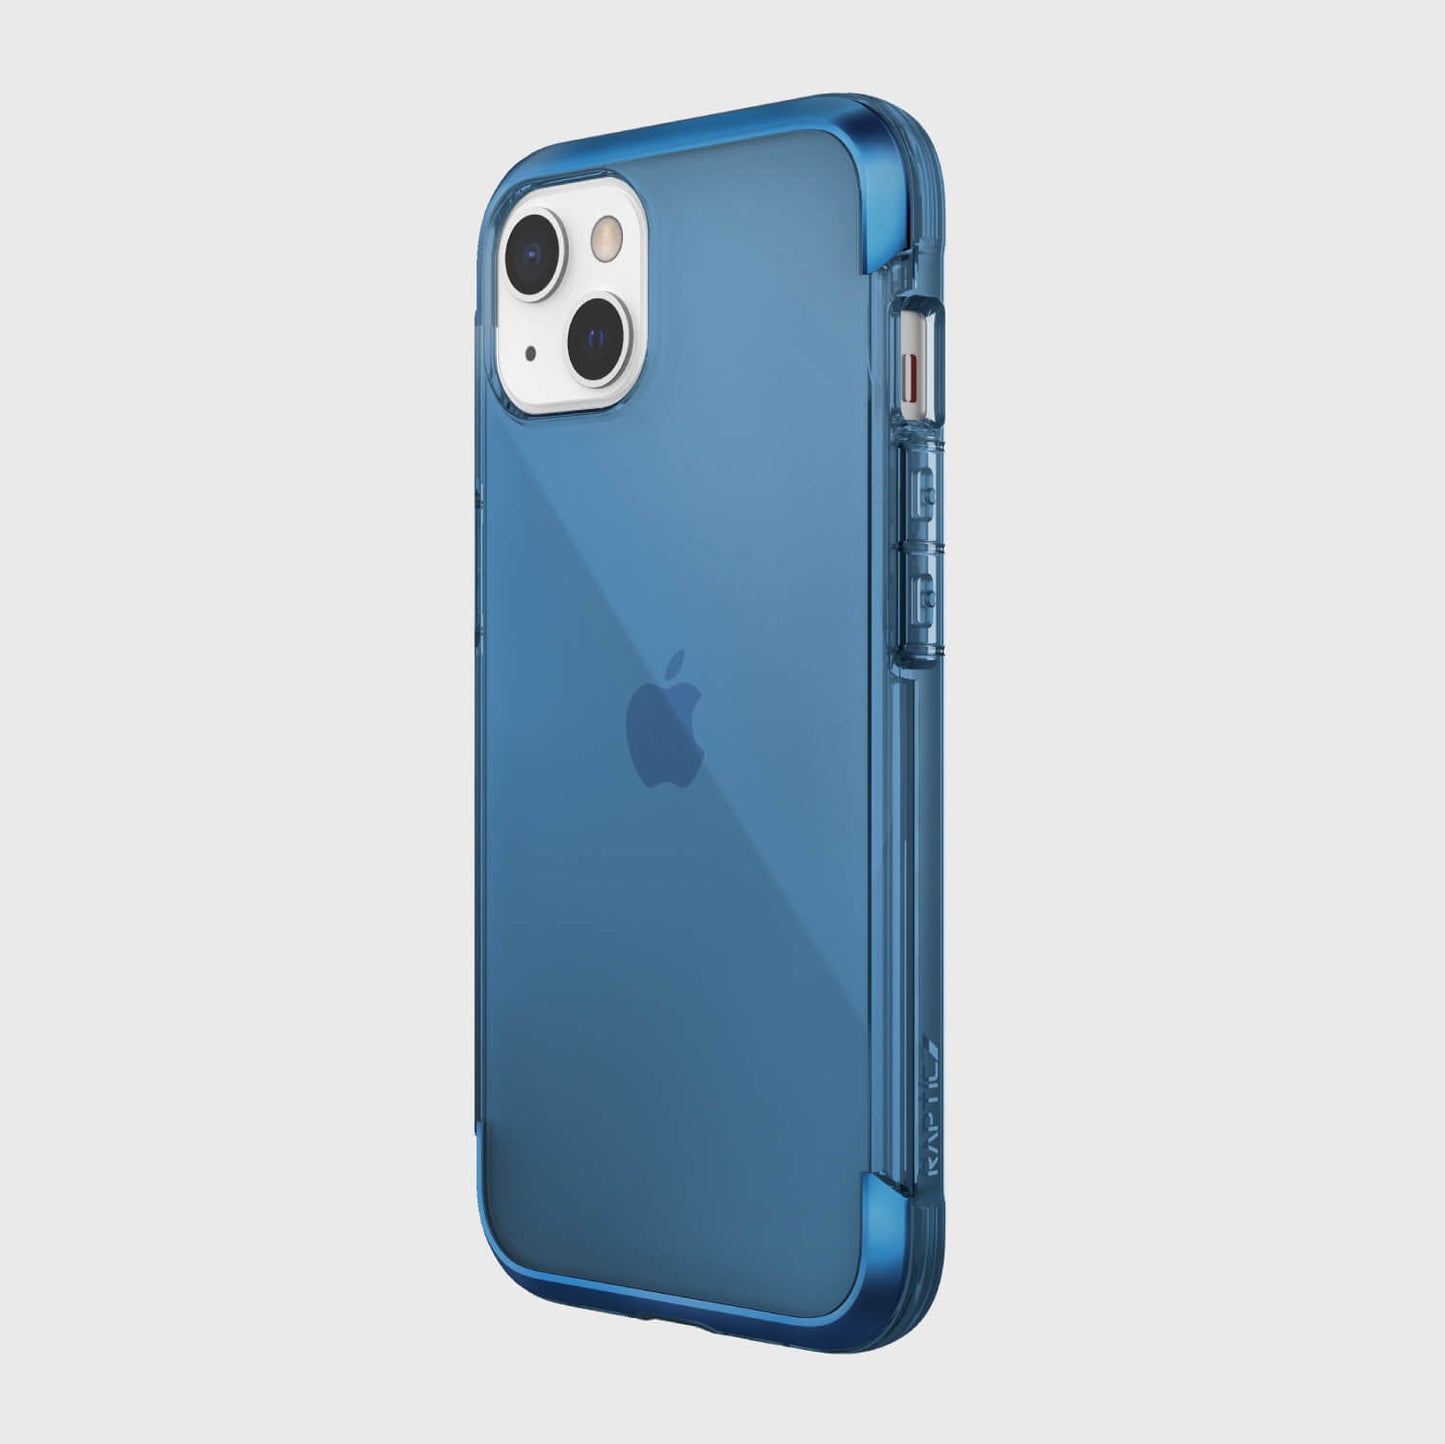 The drop-proof back of an iPhone 13 Case - AIR by Raptic in blue, providing wireless charging compatibility and 13-foot drop protection.